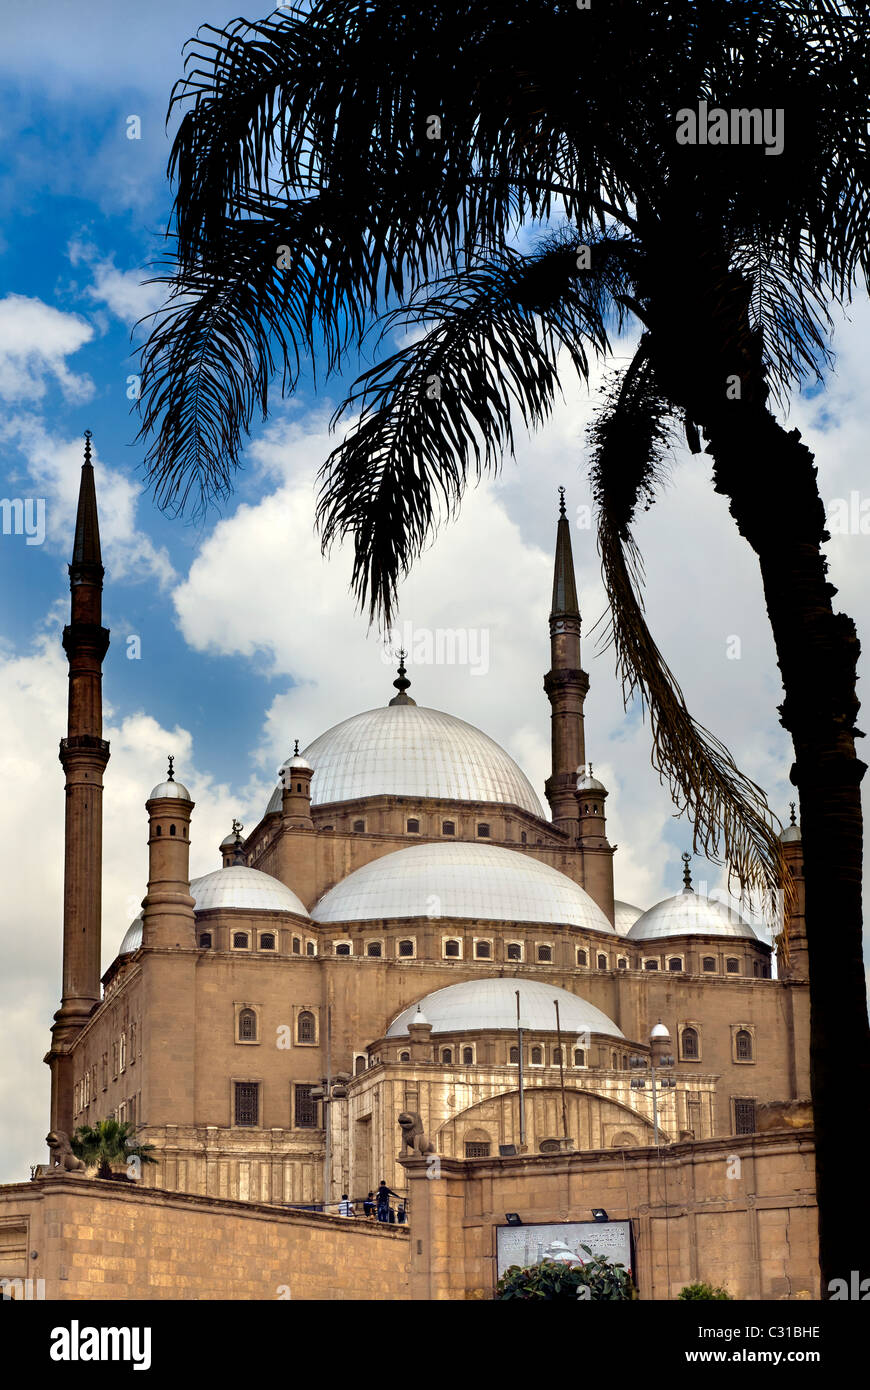 The Mosque of Muhammad Ali Pasha or Alabaster Mosque IN CAIRO, EGYPT Stock Photo